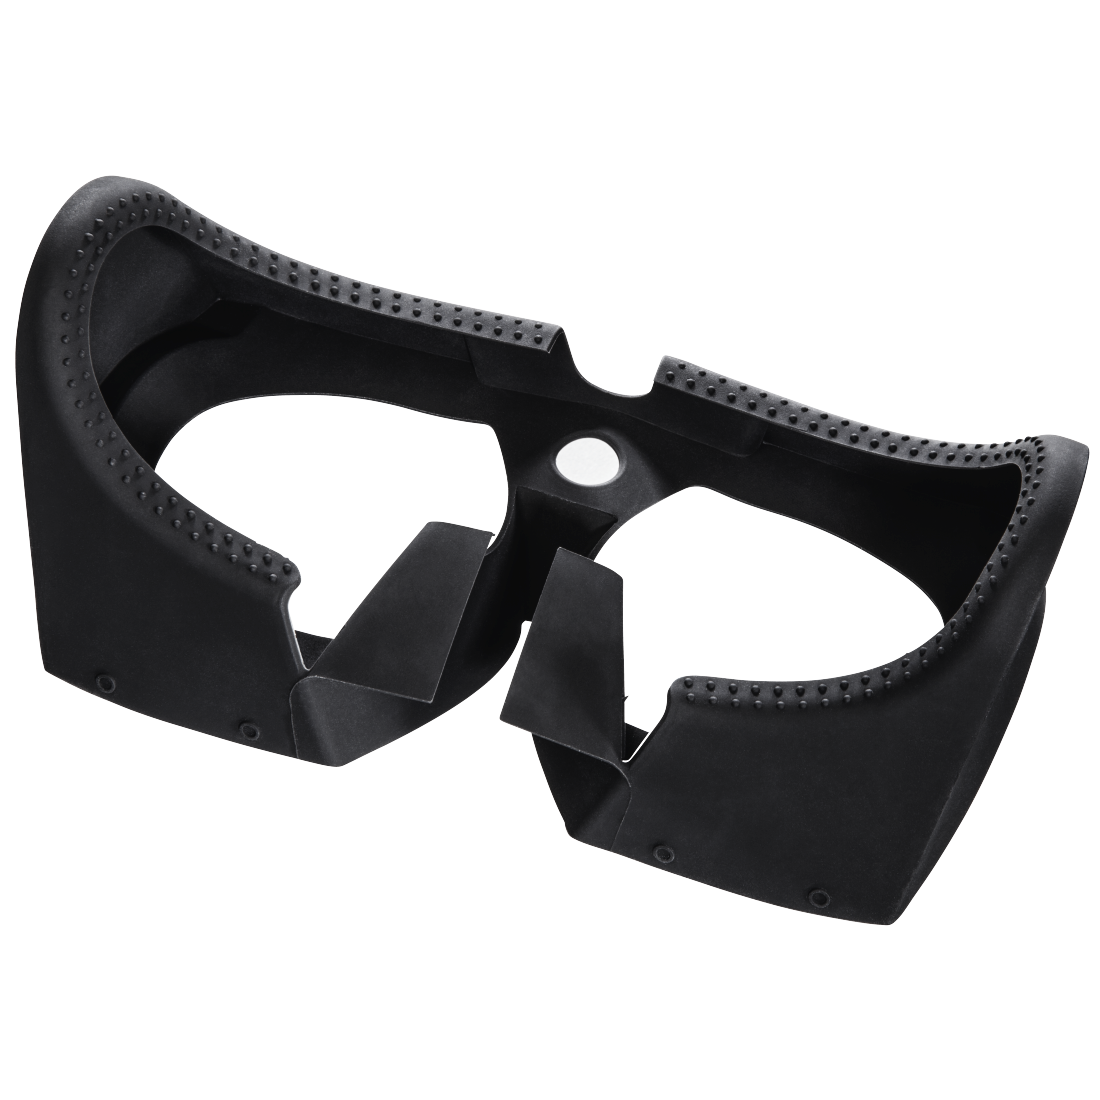 Hama PlayStation VR Replacement Eye